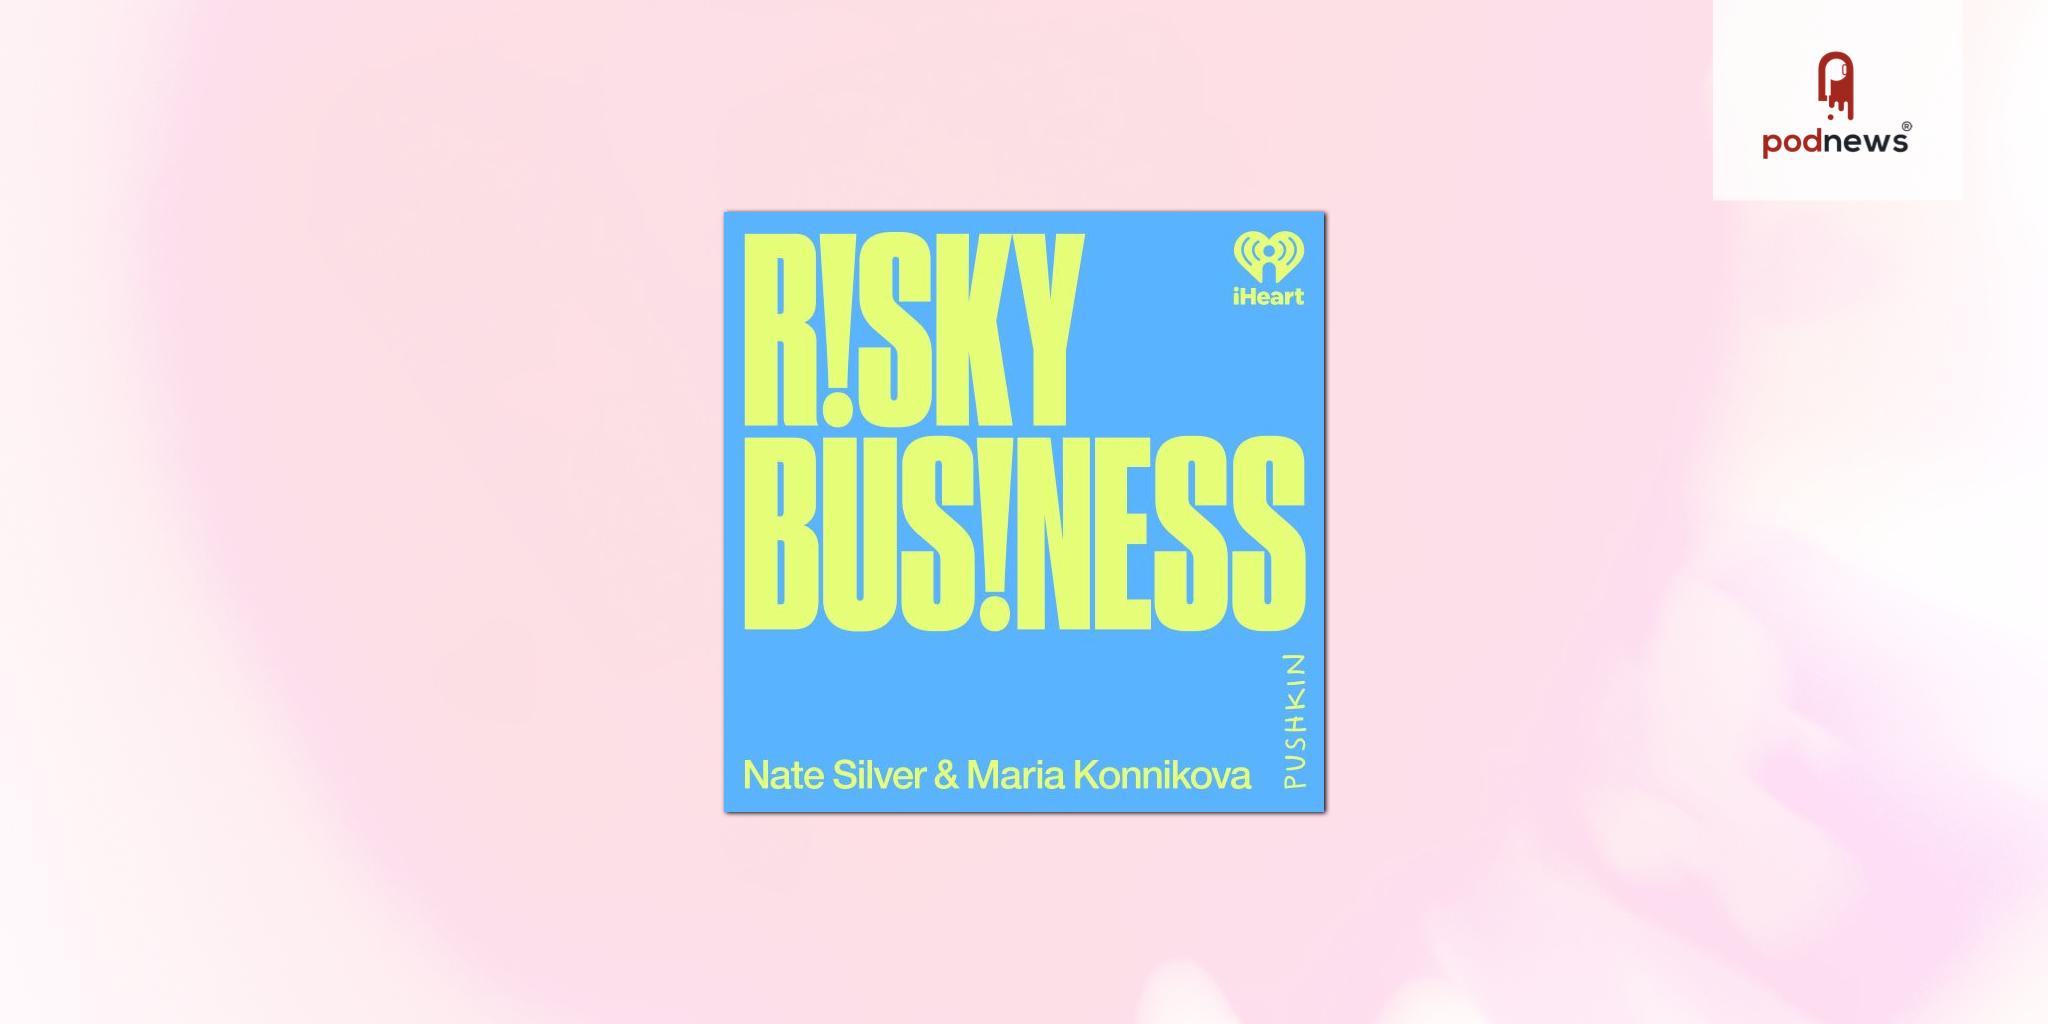 Nate Silver and Maria Konnikova announce new podcast Risky Business from Pushkin Industries and iHeartPodcasts